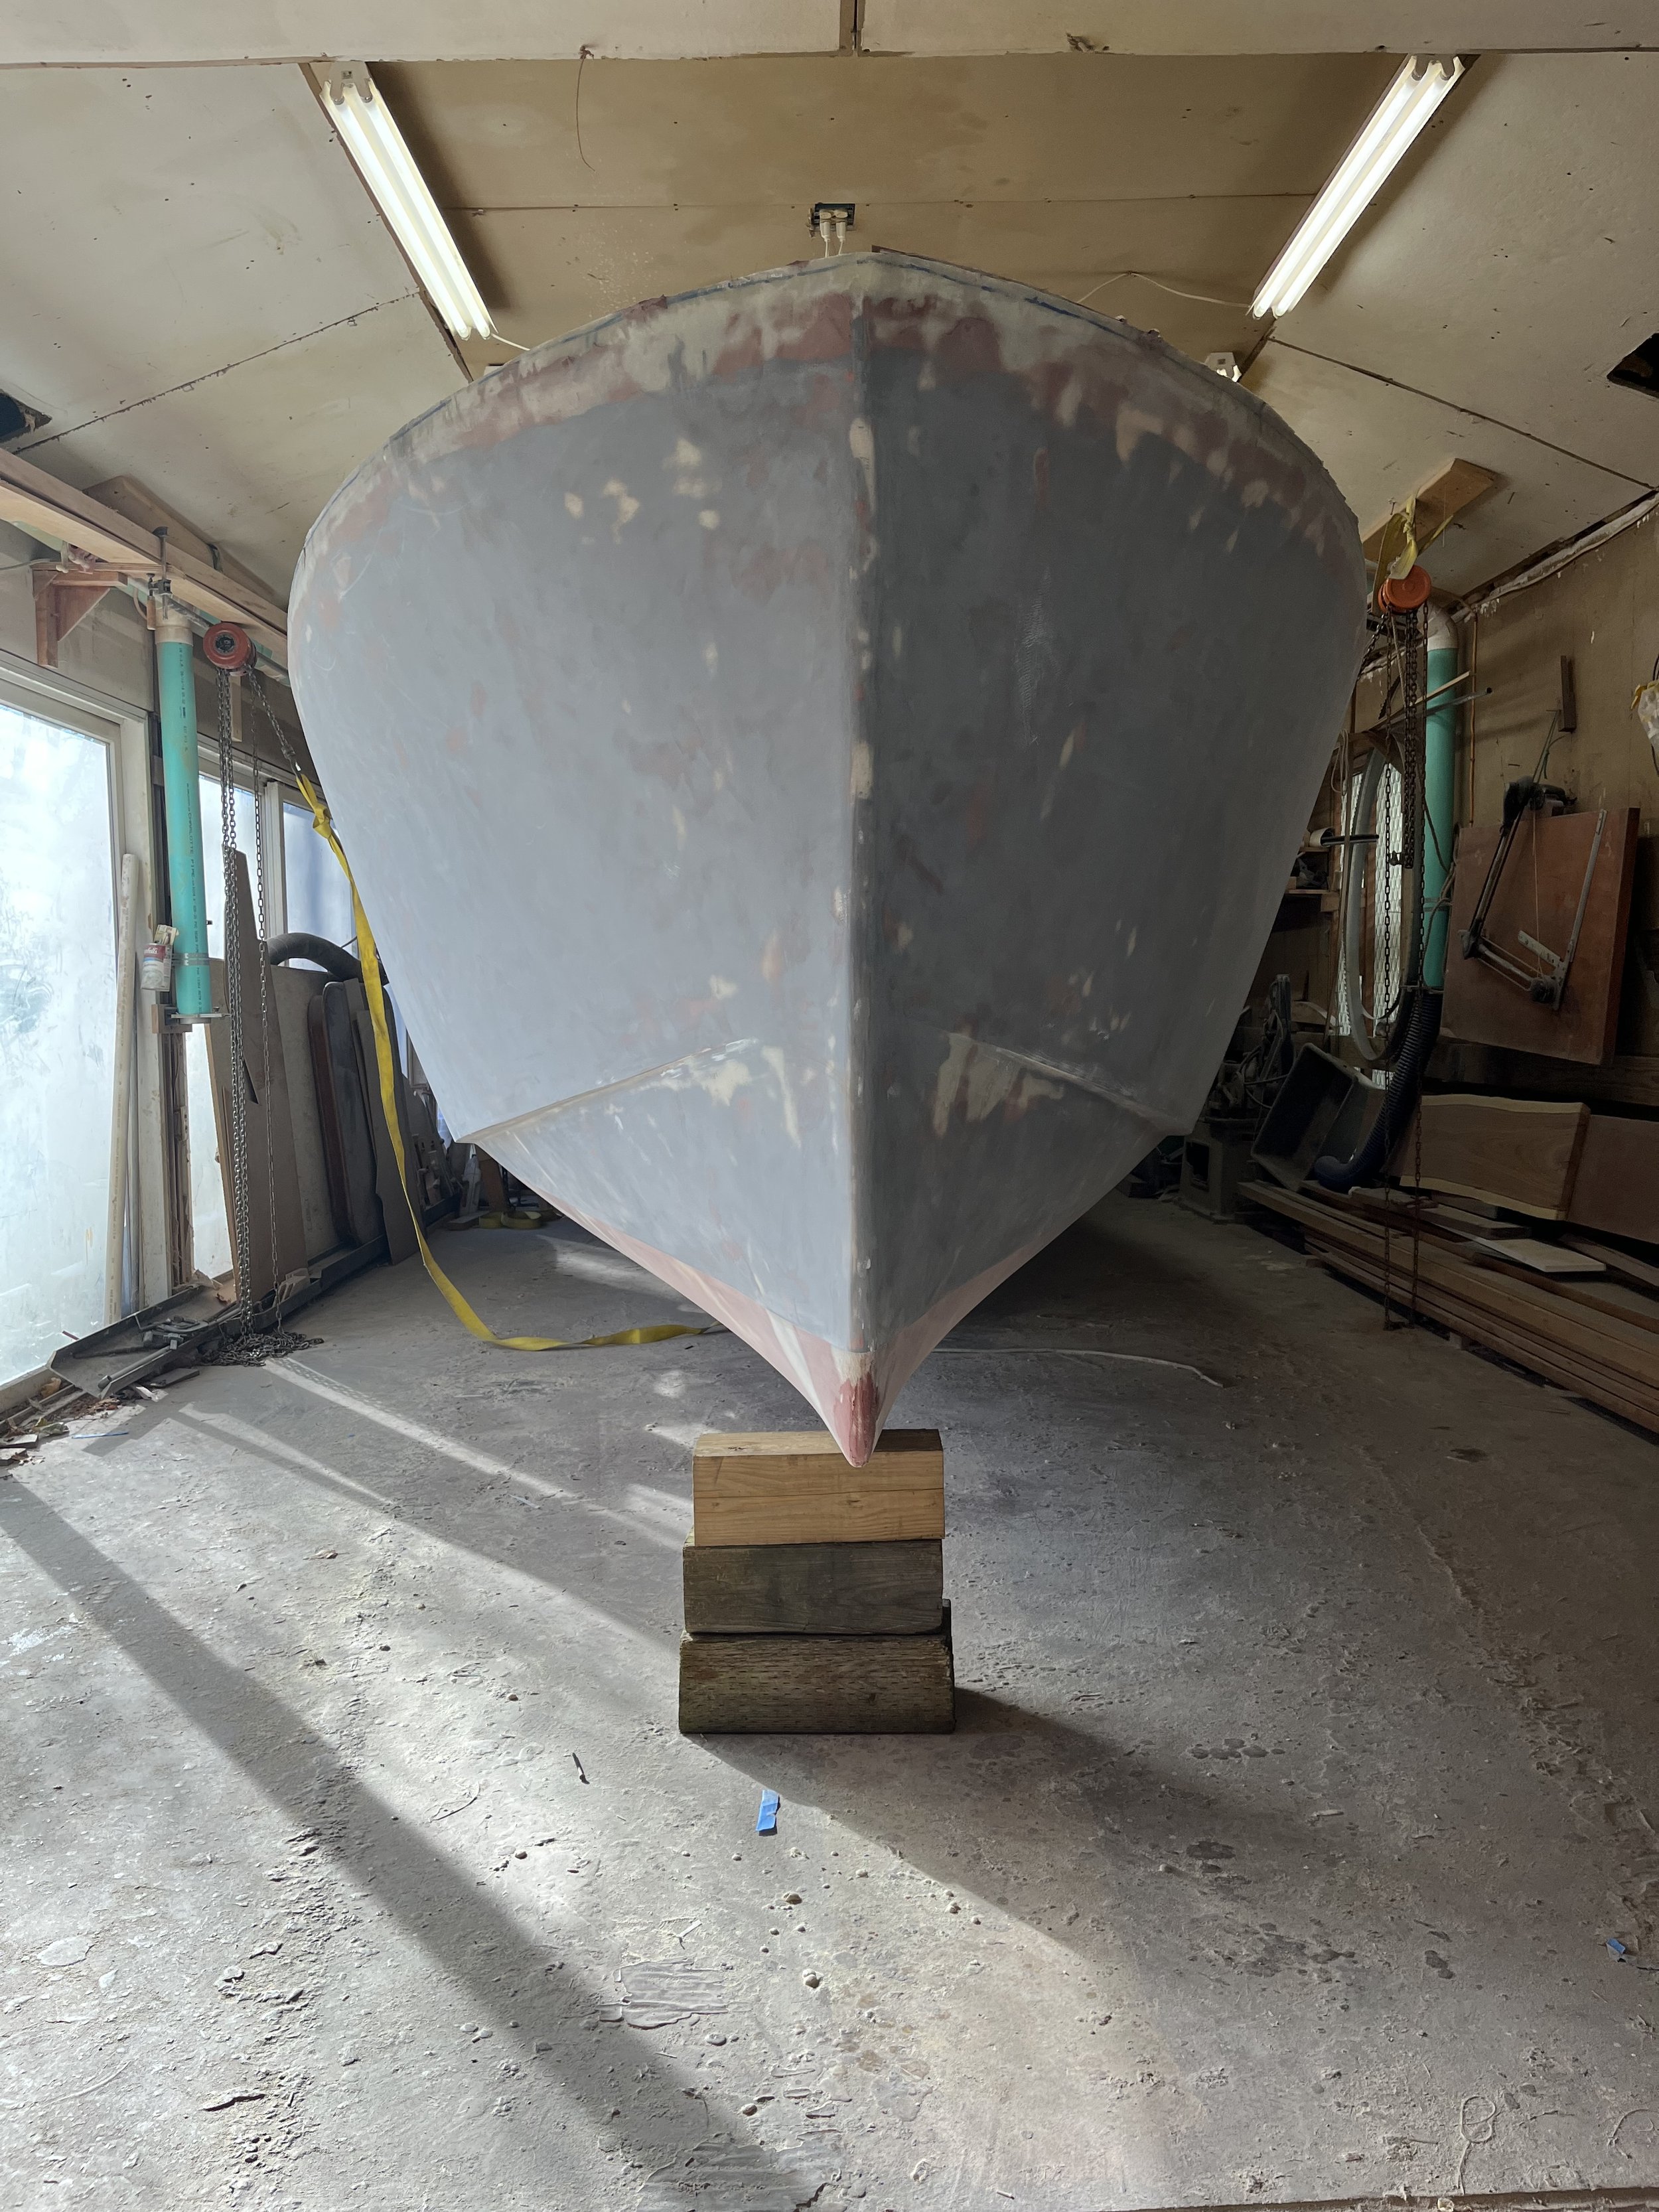    Exterior fiberglassing has been sanded and the boat has been flipped right side up, in preparation for interior fiberglass and structural work, December 2022   